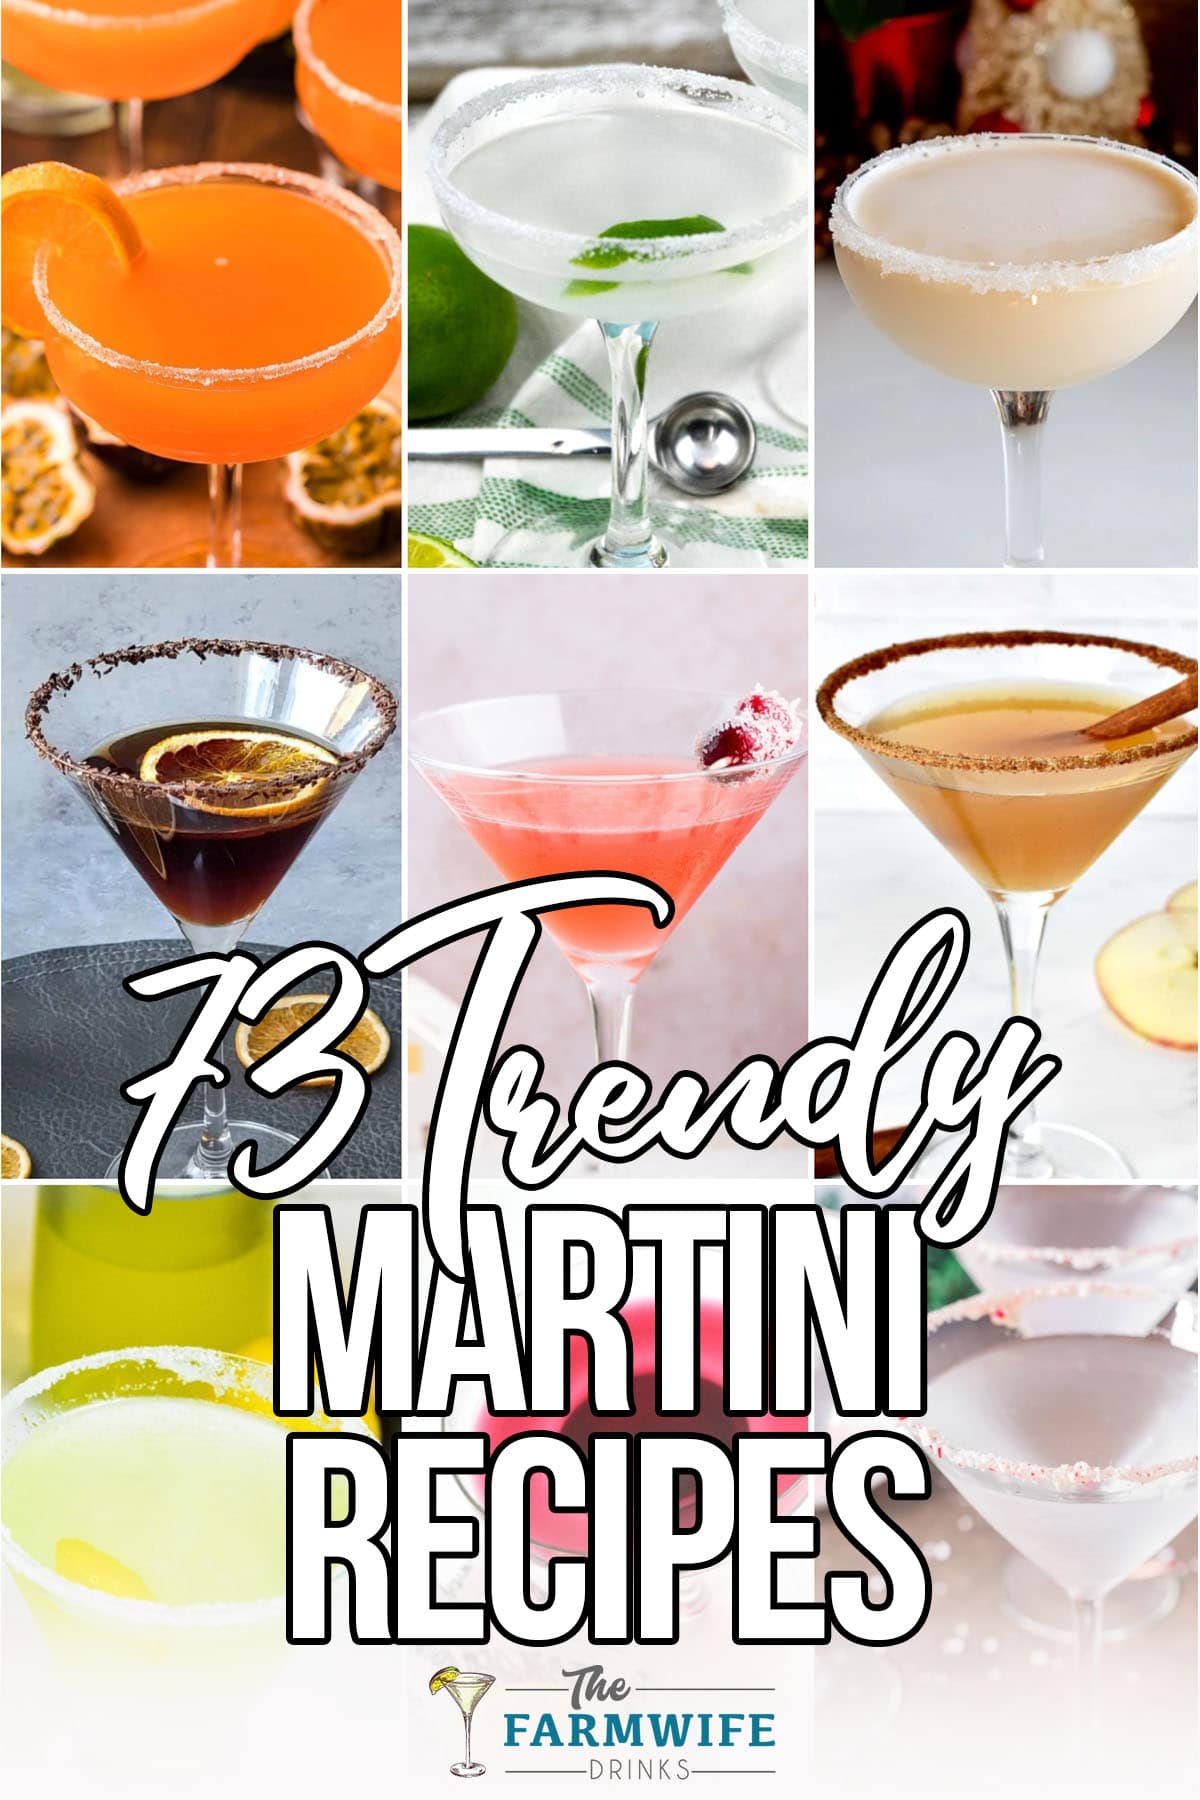 photo collage of martini recipes with text which reads 73 trendy martini recipes